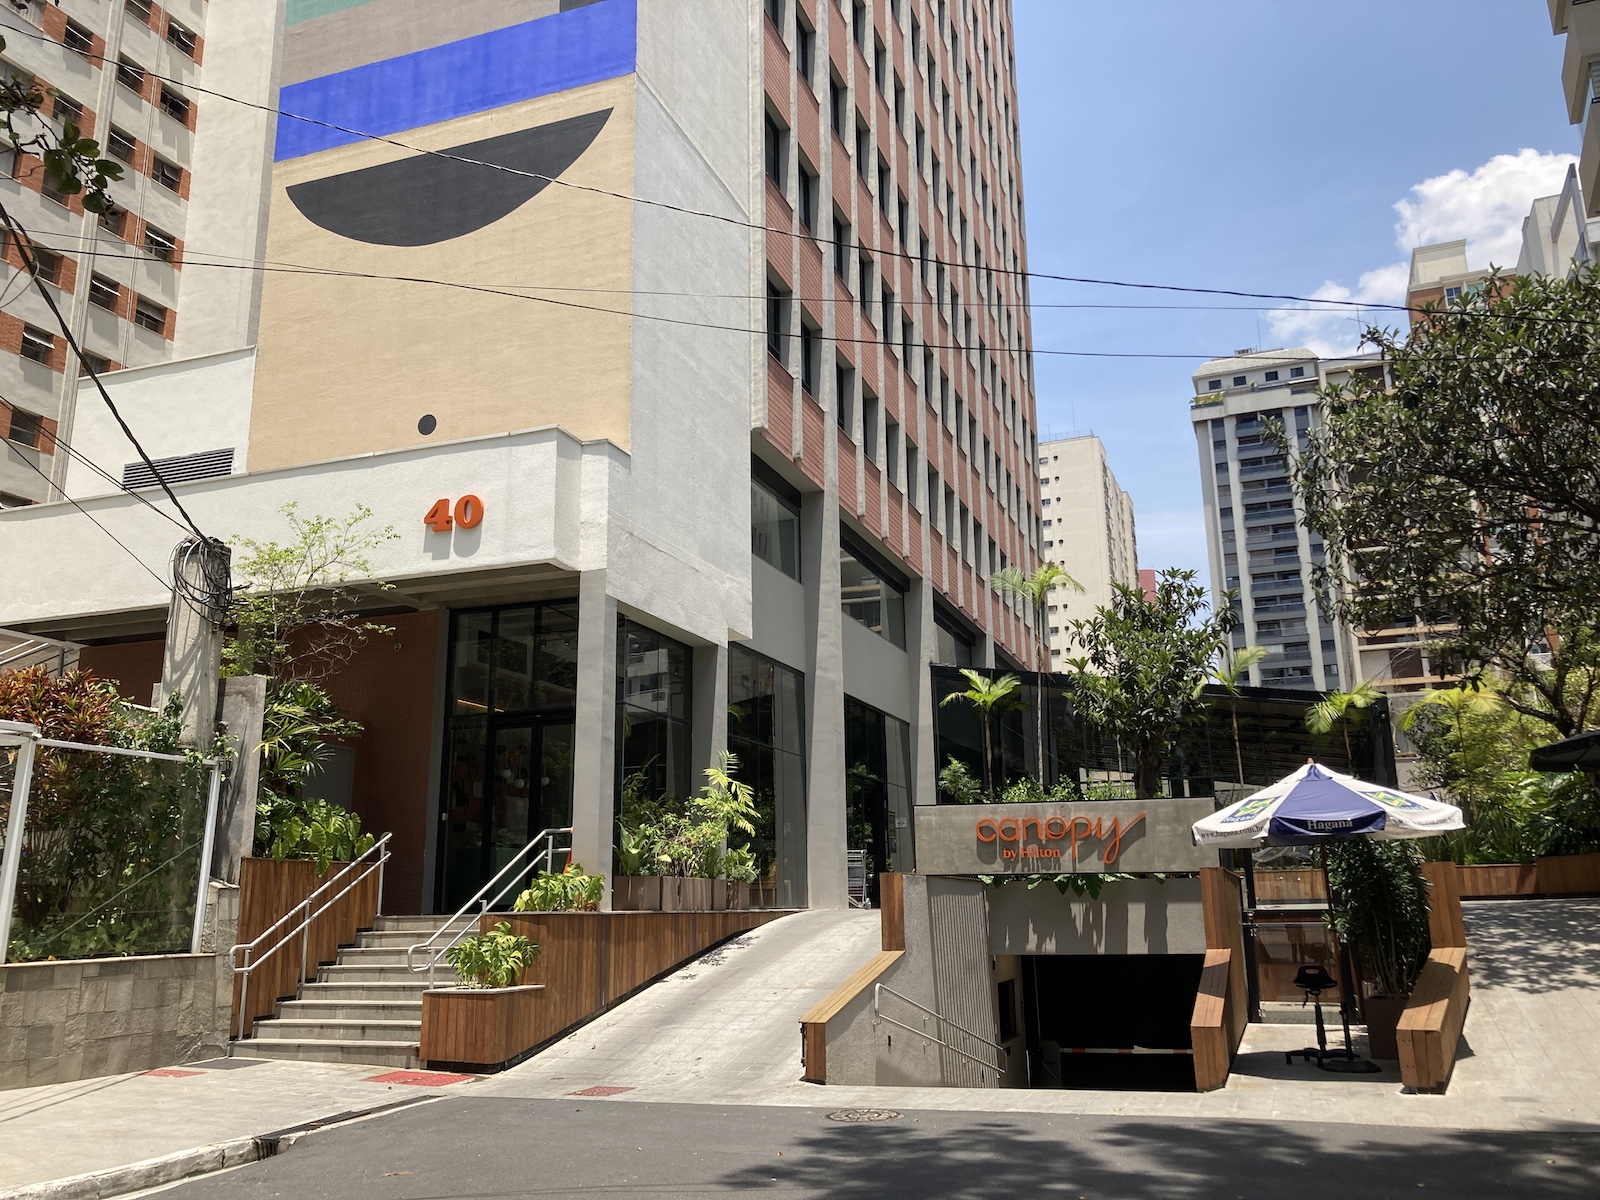 Hotel Review: Canopy by Hilton São Paulo Jardins - A Lot of Positives